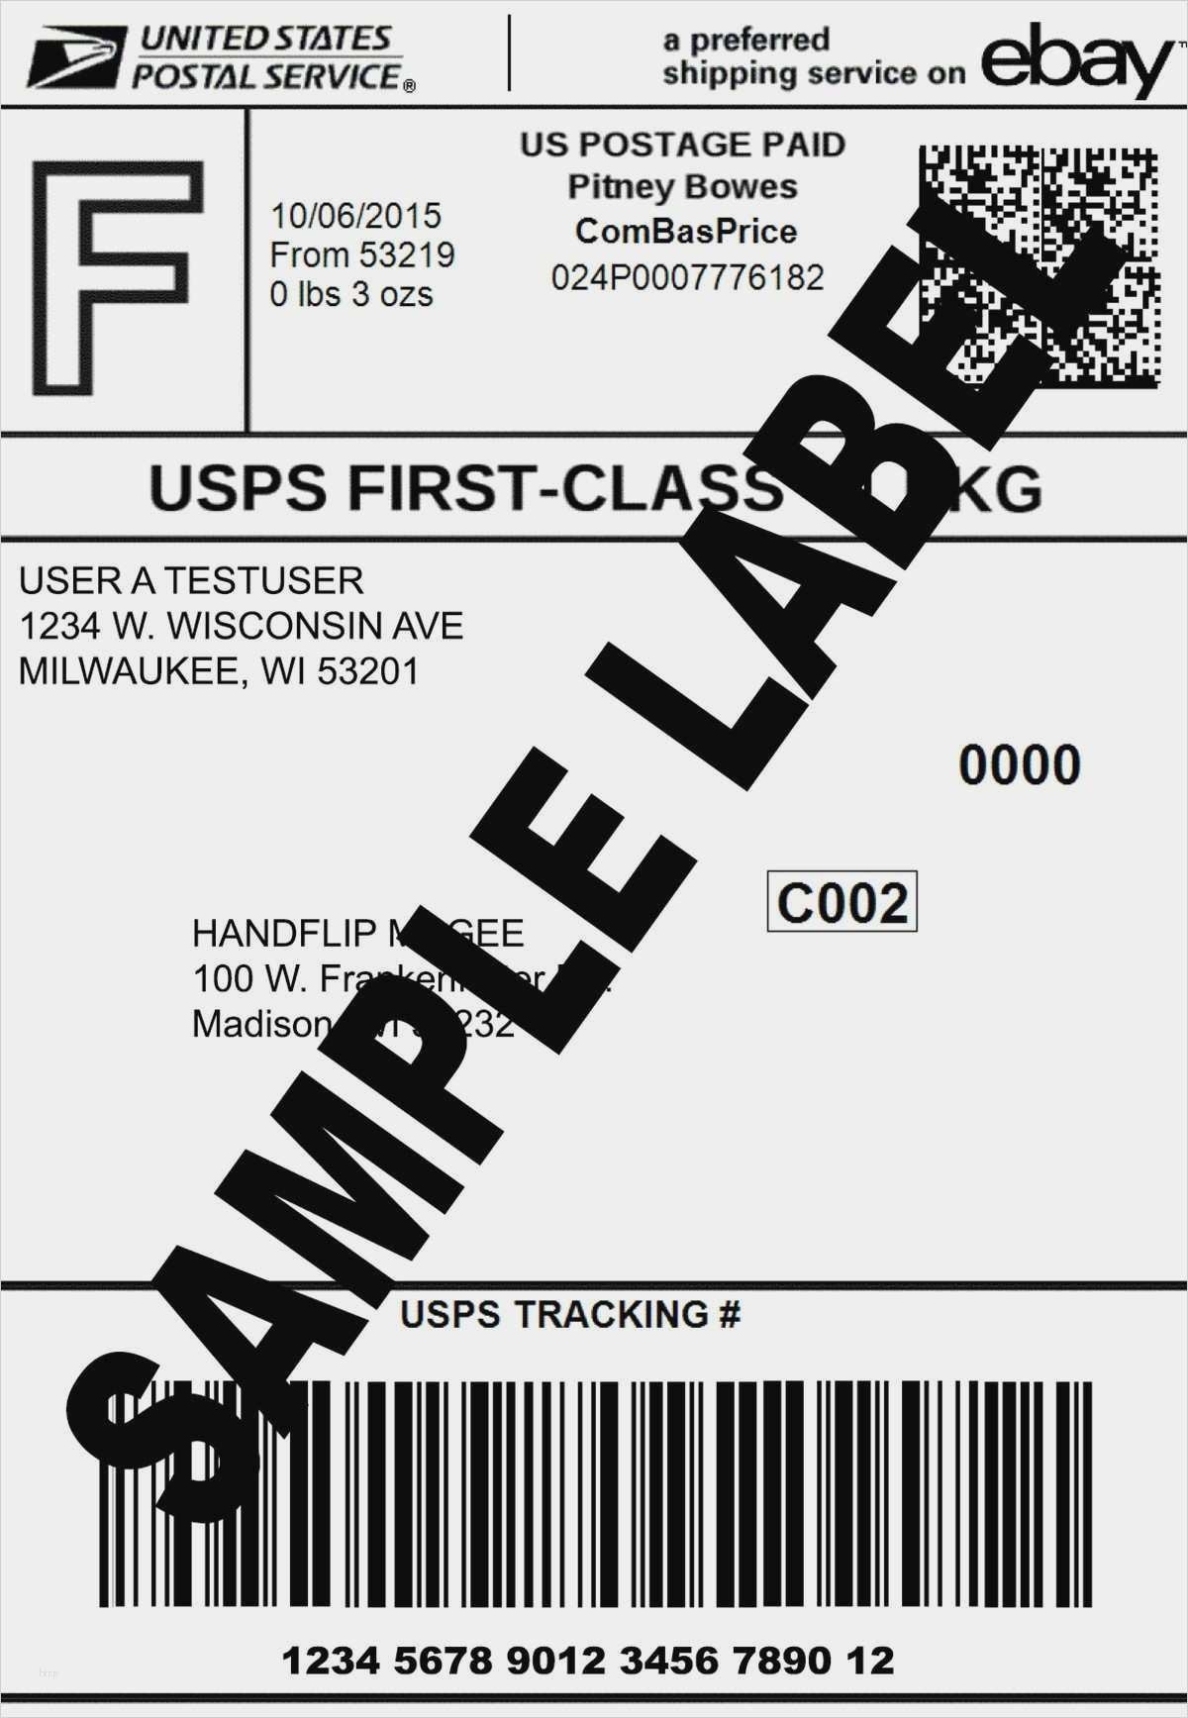 Dymo Label Vorlagen Hübsch Inspirational Usps Shipping Label Template Throughout Dymo Label Templates For Word